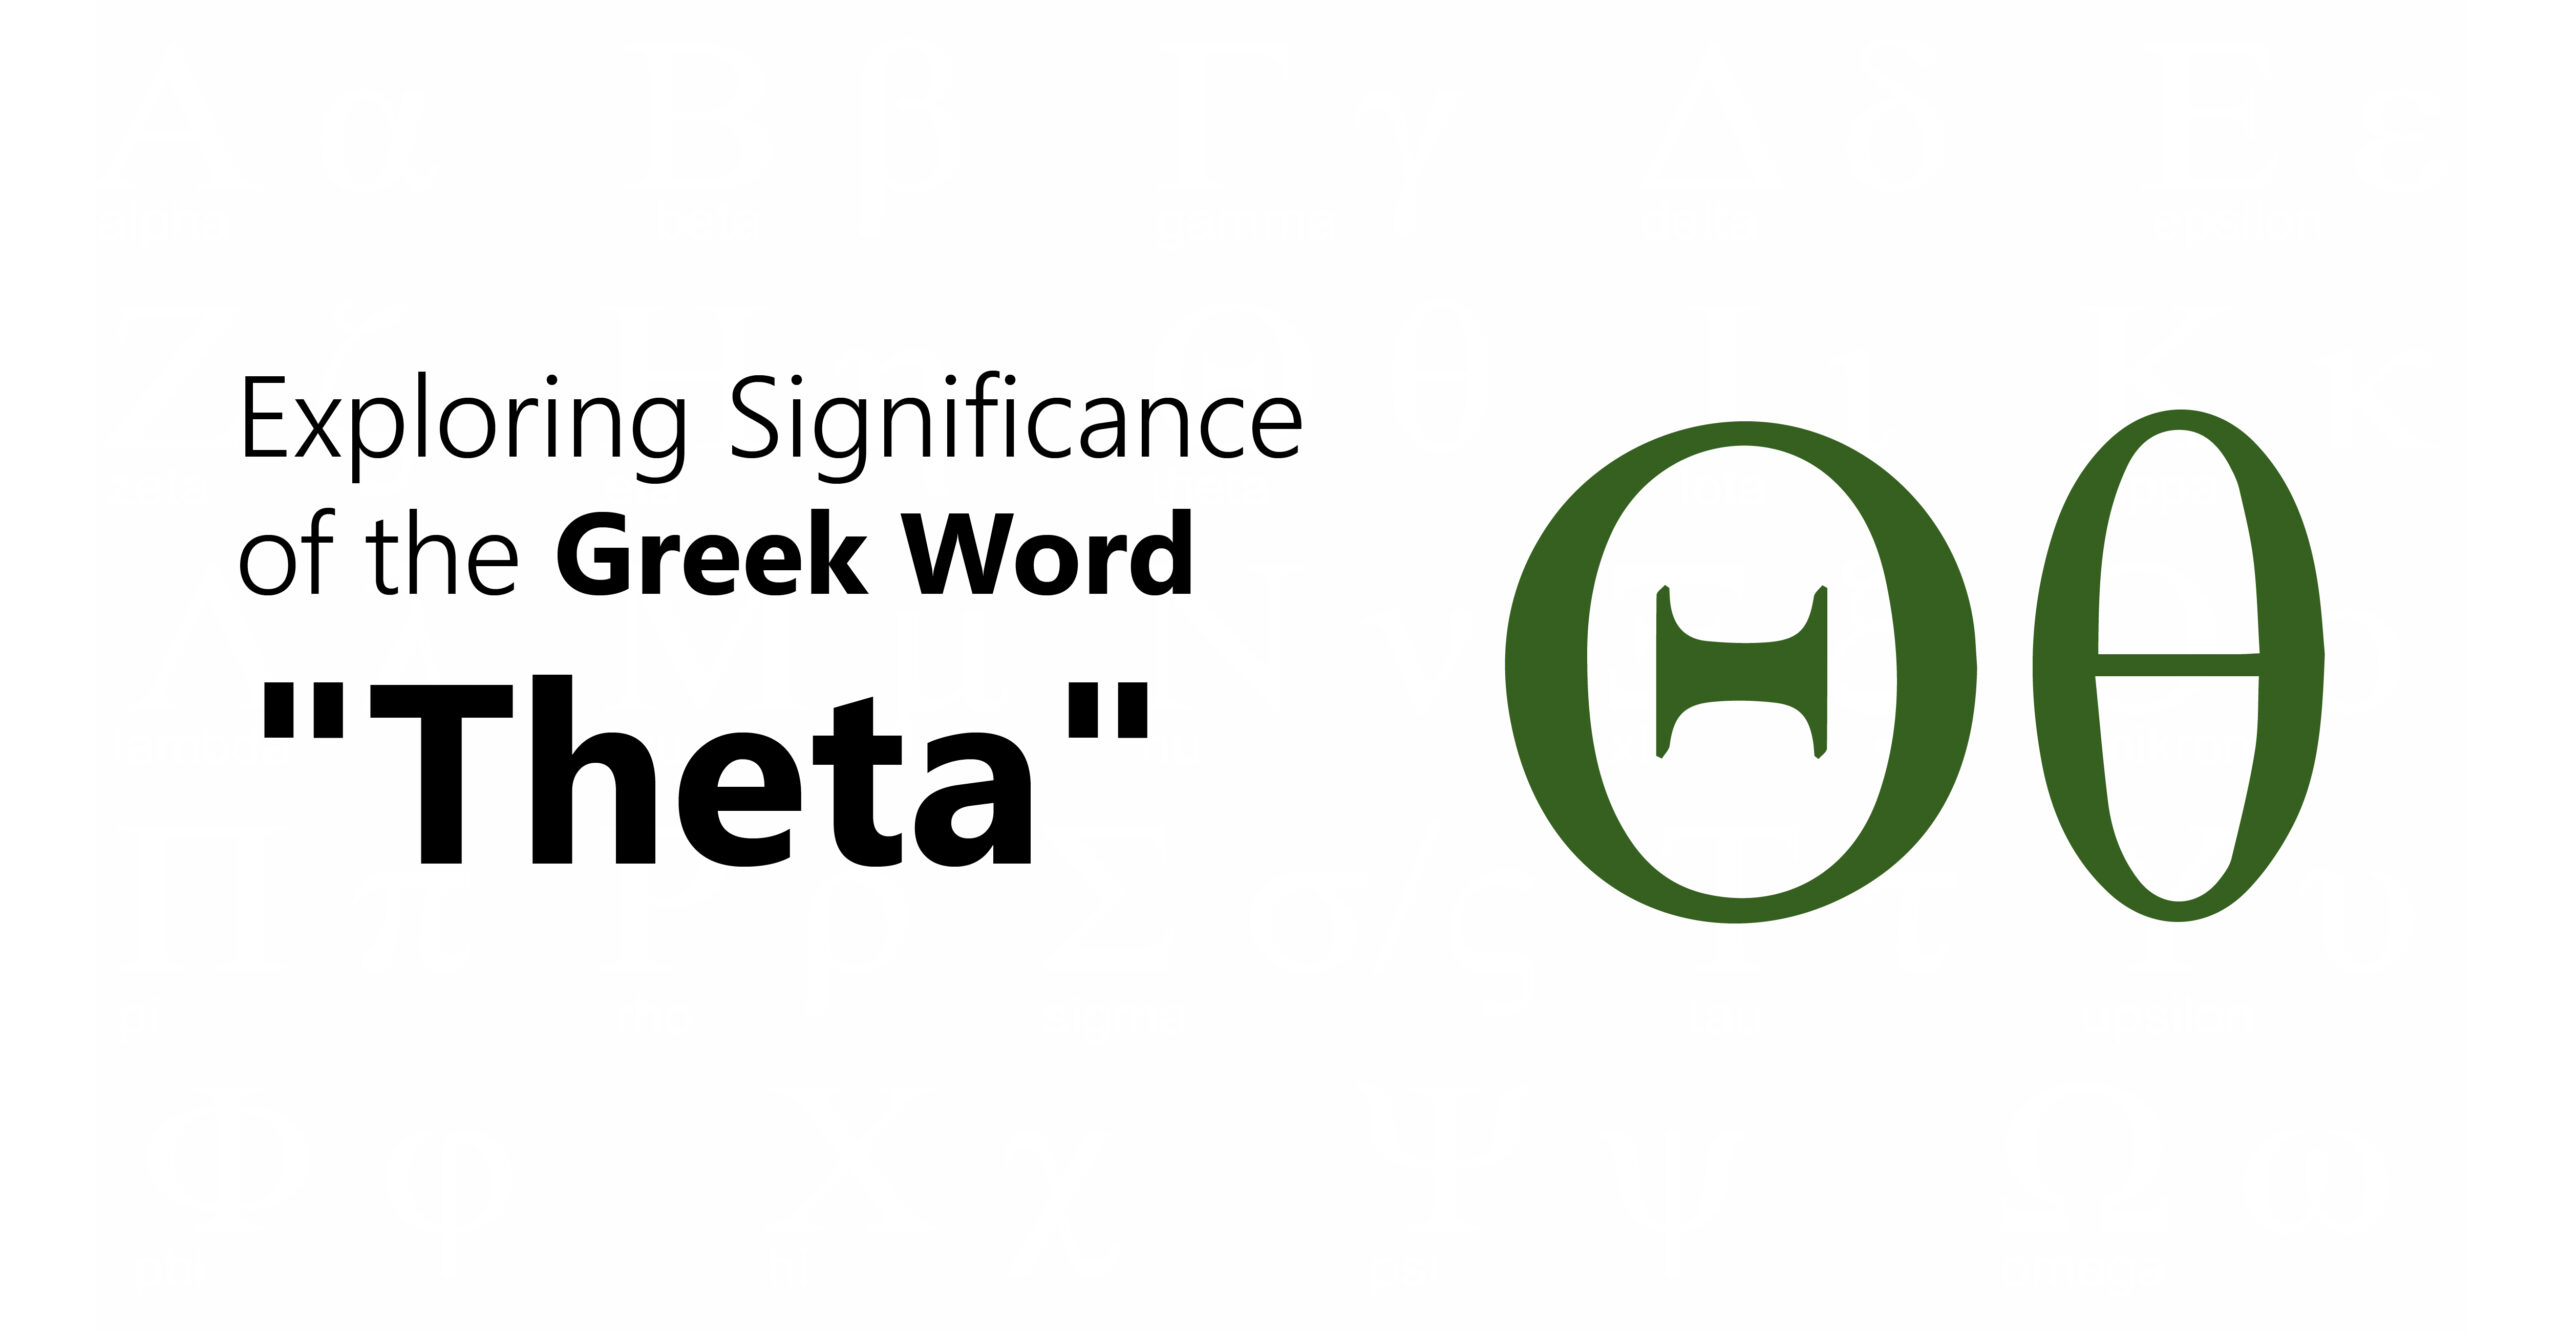 Exploring Significance of the Greek Word “Theta”